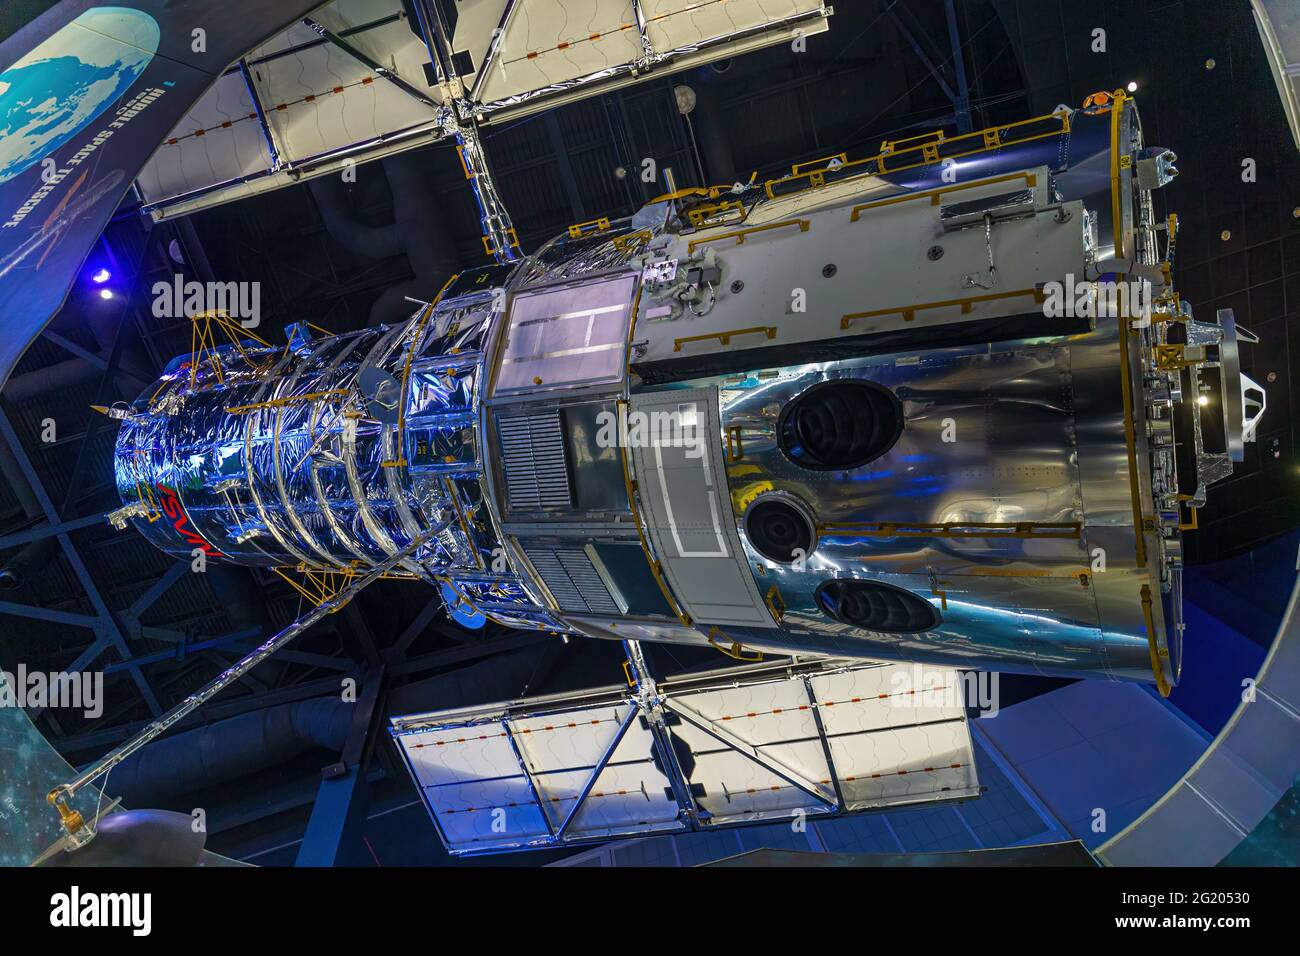 Cape Canaveral, Florida, USA - May 27: Hubble Telescope on display on May 27, 2014 at the Kennedy Space Visitors Center Stock Photo